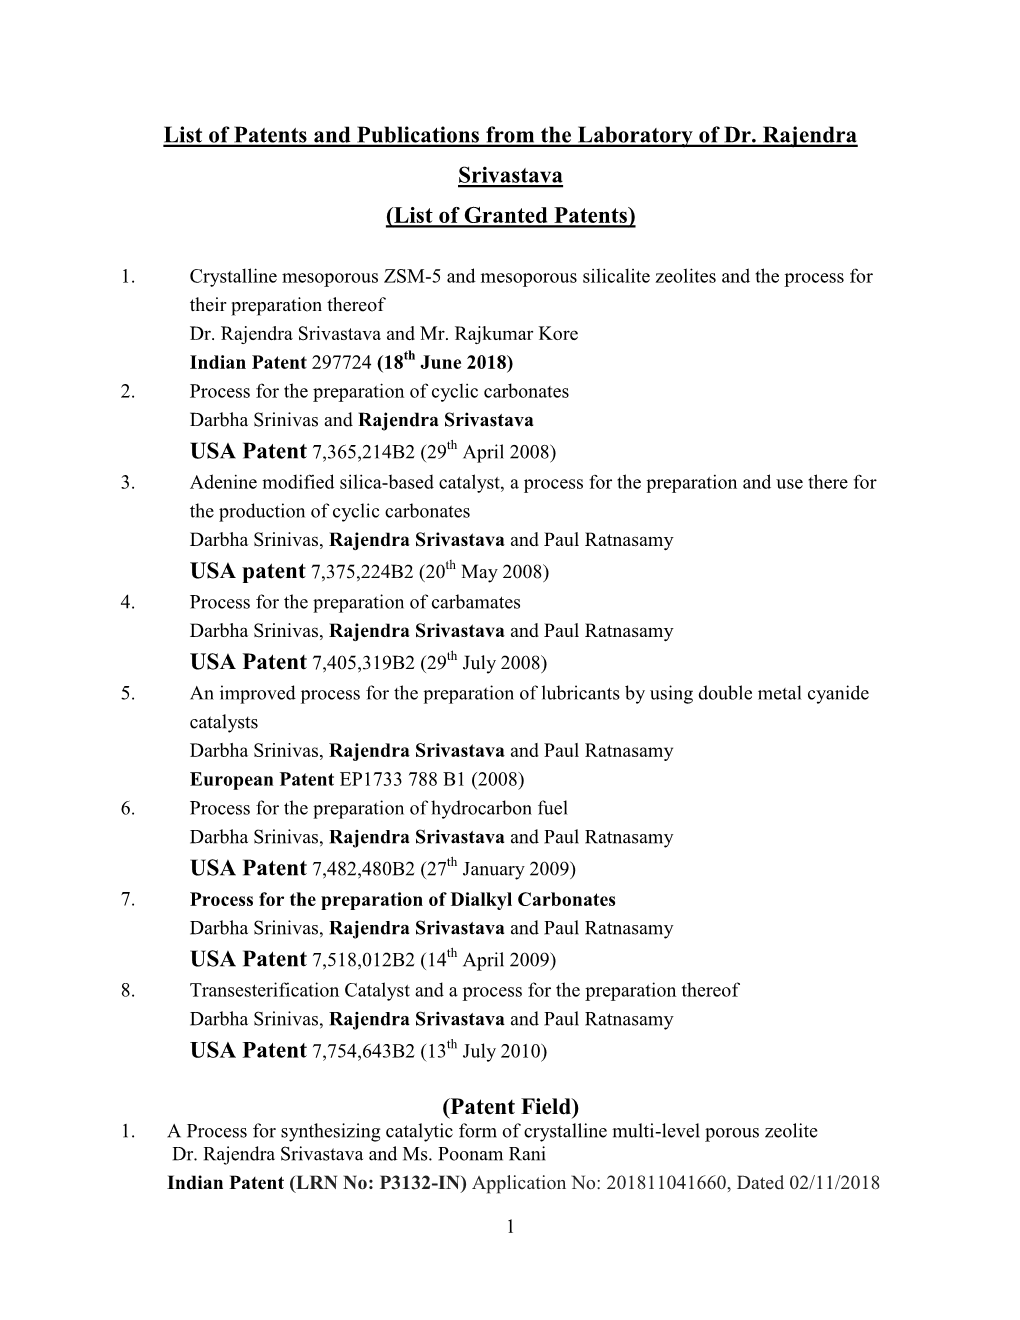 List of Granted Patents) (Patent Field